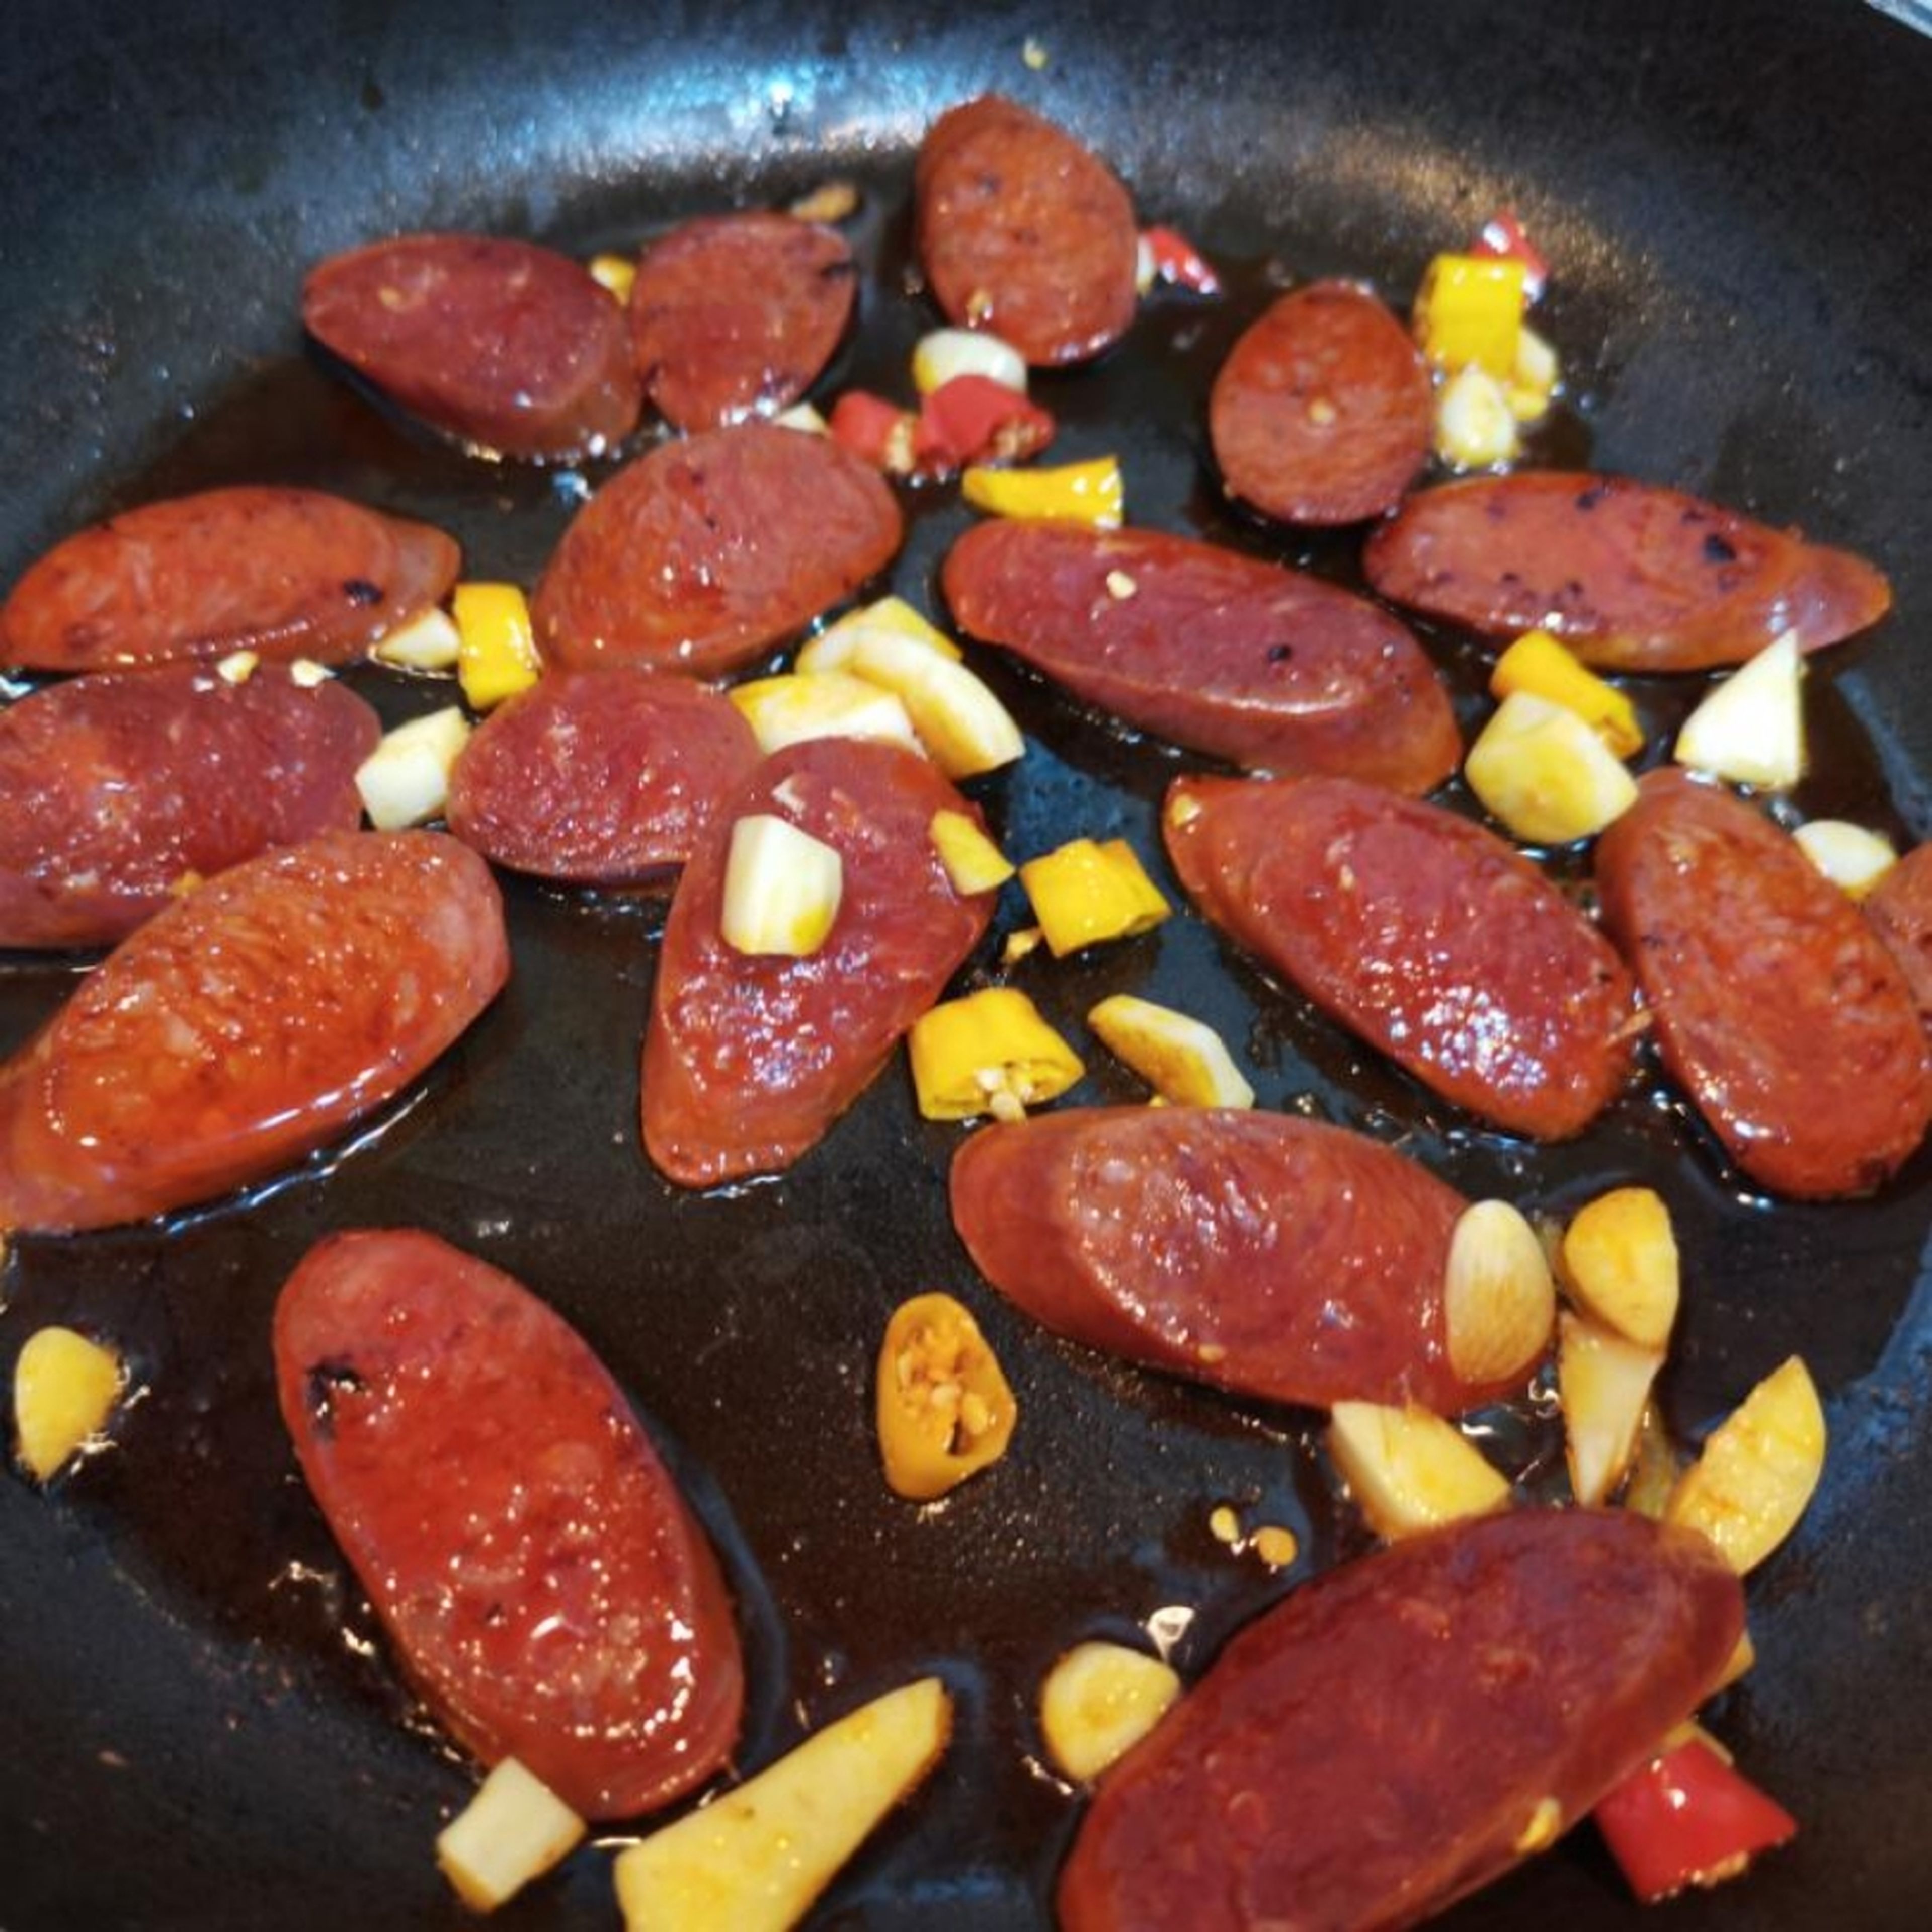 Put 1 tbsp oil in the frying pan, then fry garlic, chilli pepper until aromatic, then add chorizo in the pan for 3 min until the oil from chorizo comes out. Put cherry tomatoes in and cook for another 5 min.